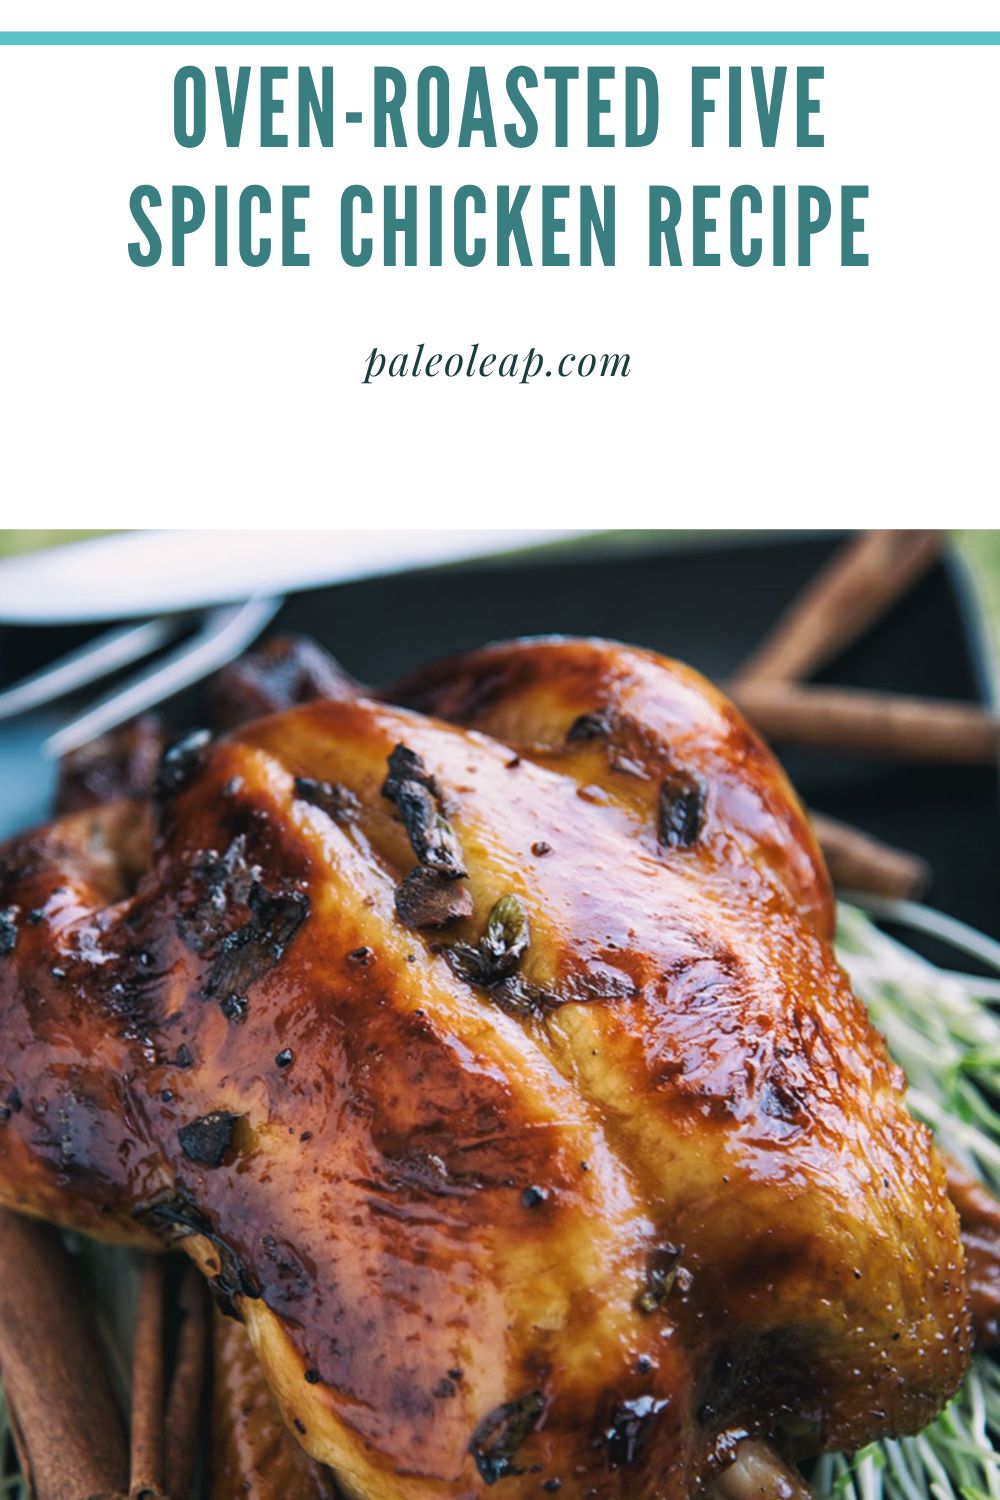 Oven-Roasted Five Spice Chicken Recipe | Paleo Leap